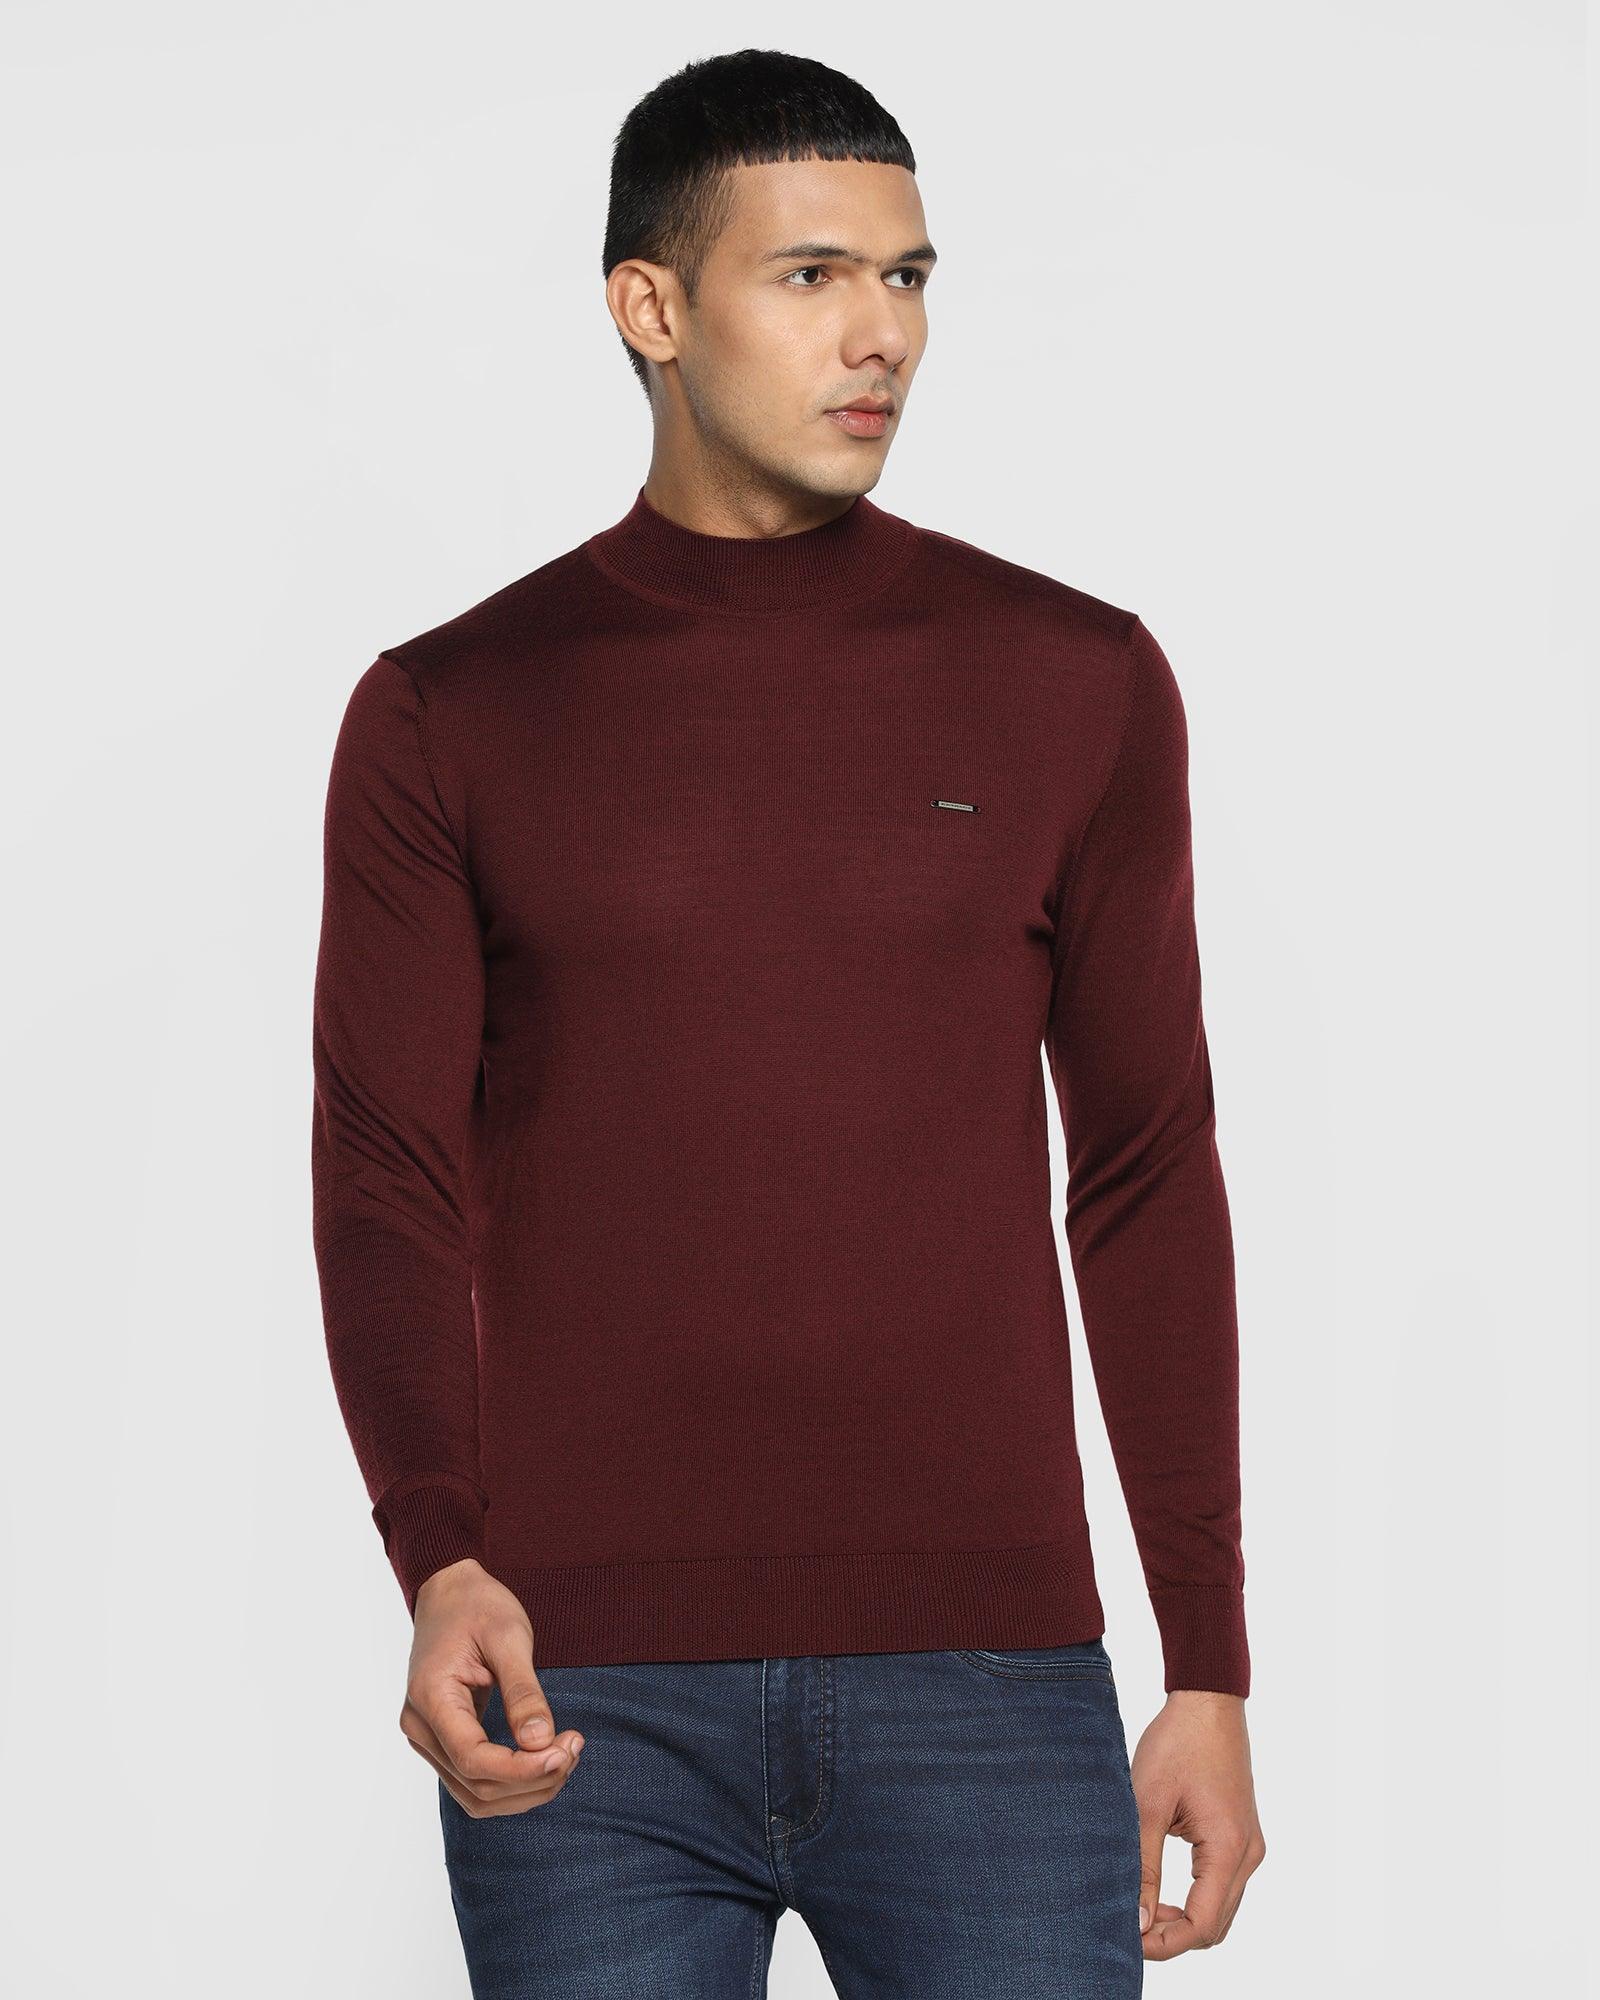 stylized-collar-wine-solid-sweater---domin